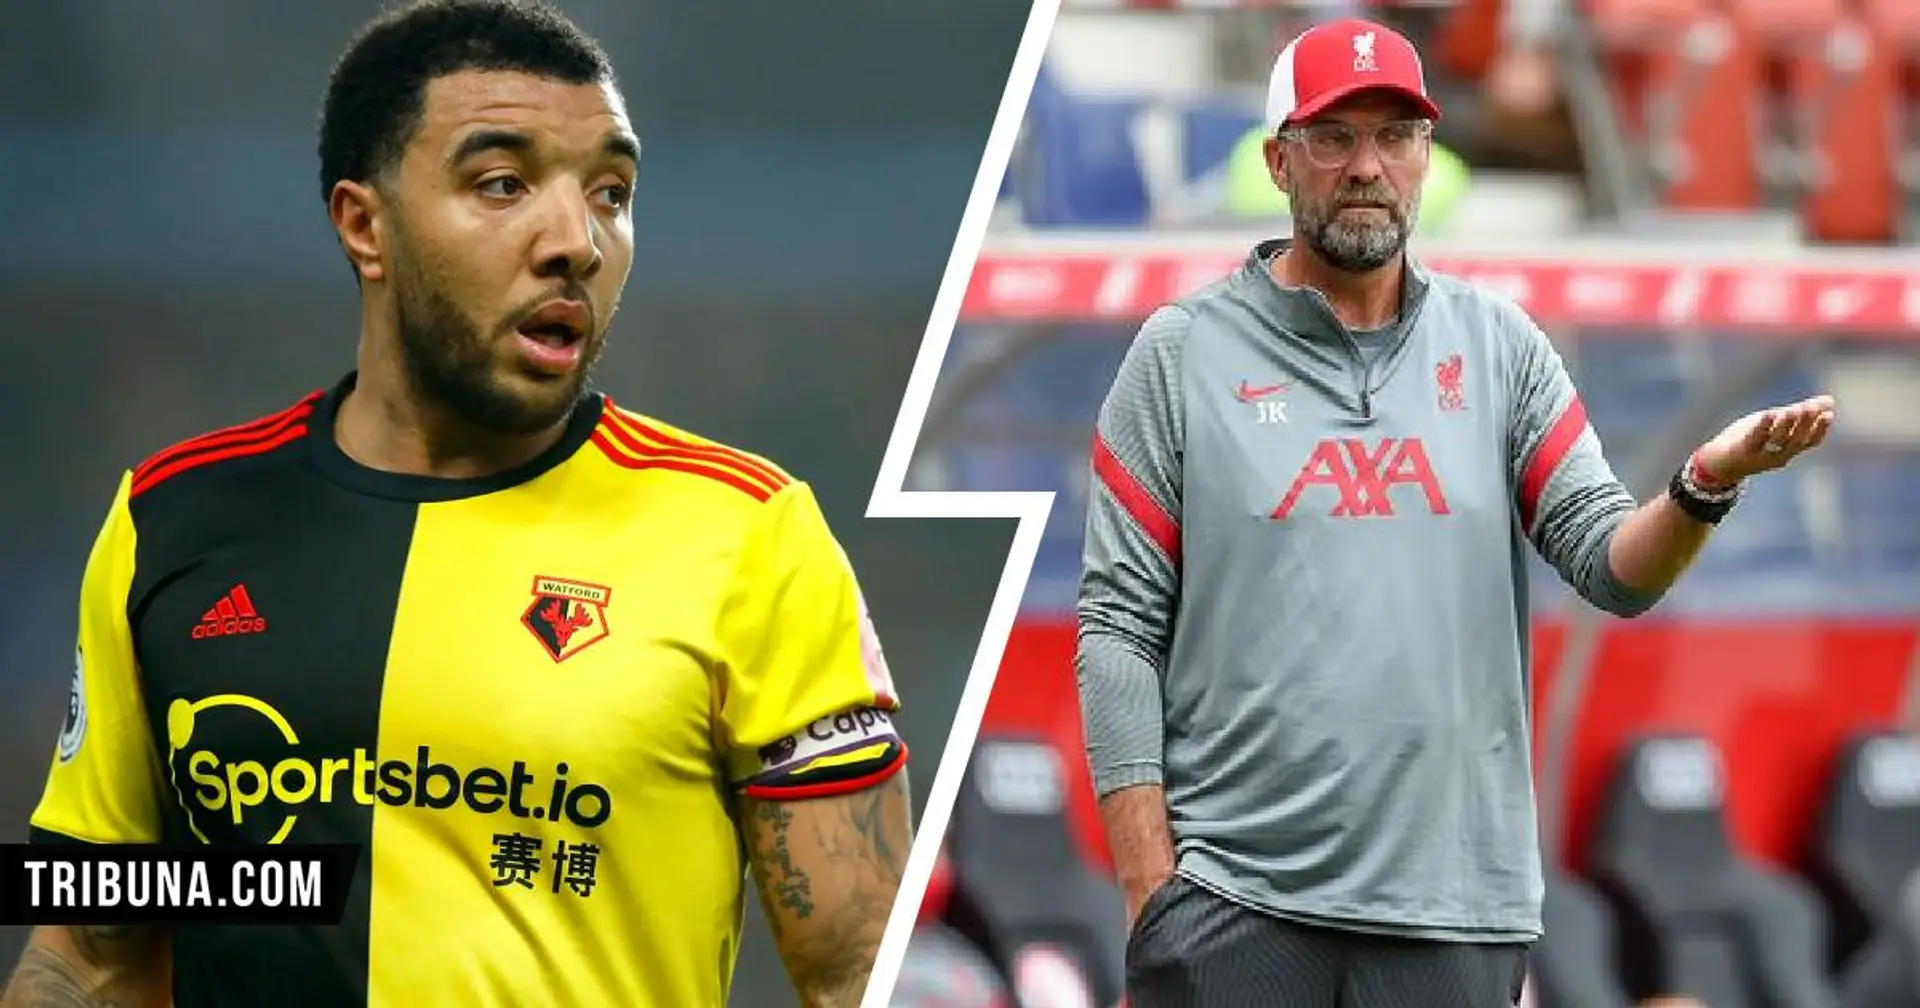 'He's very straightforward, he just tells you what he thinks': Troy Deeney defends Klopp over his post-match 'excuses'